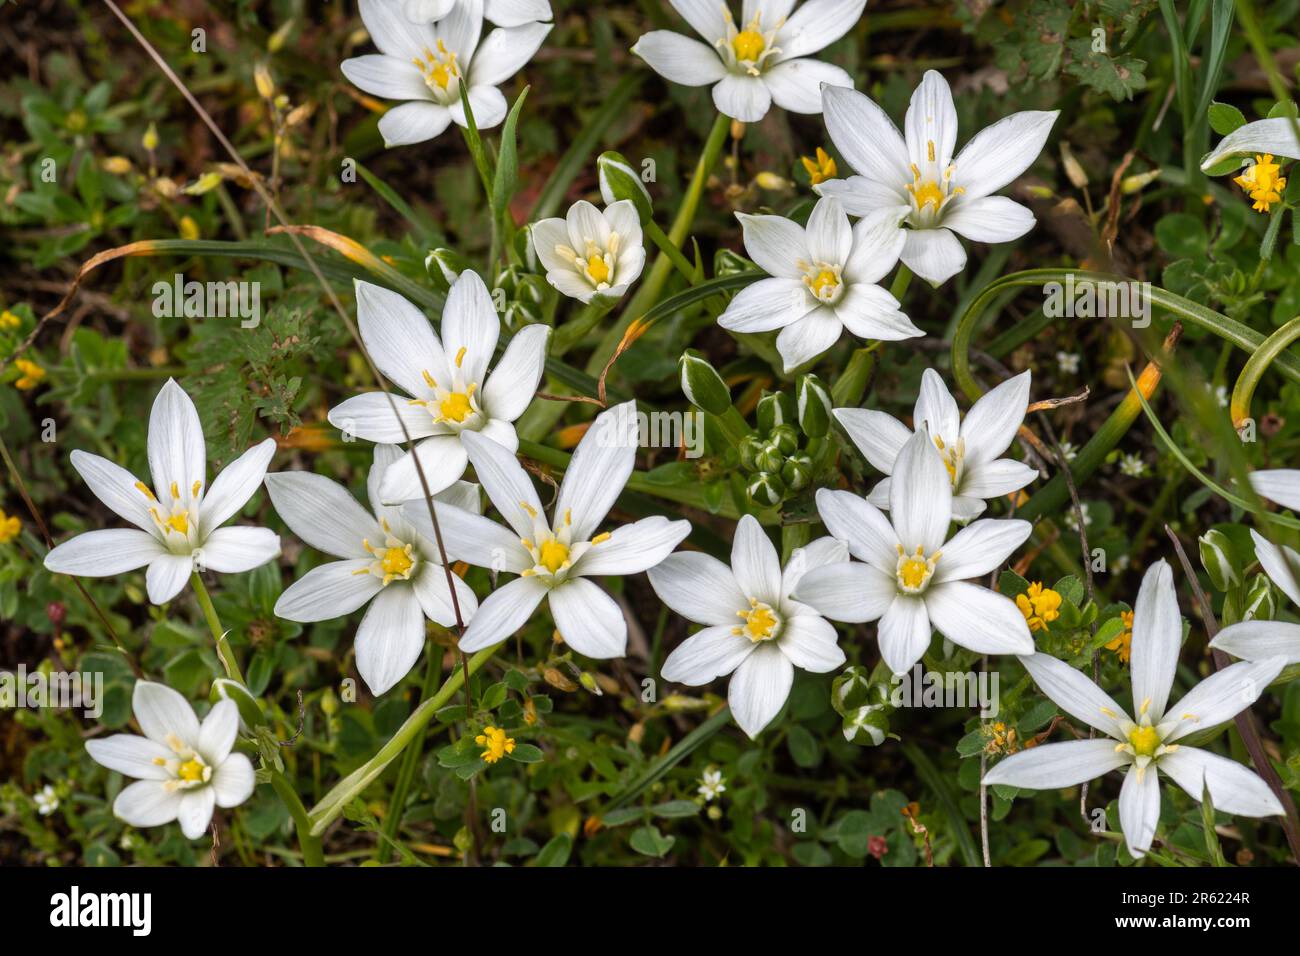 Common star of Bethlehem (Ornithogalum umbellatum) flowers, a bulbous perennial plant flowering in May, Italy, Europe Stock Photo